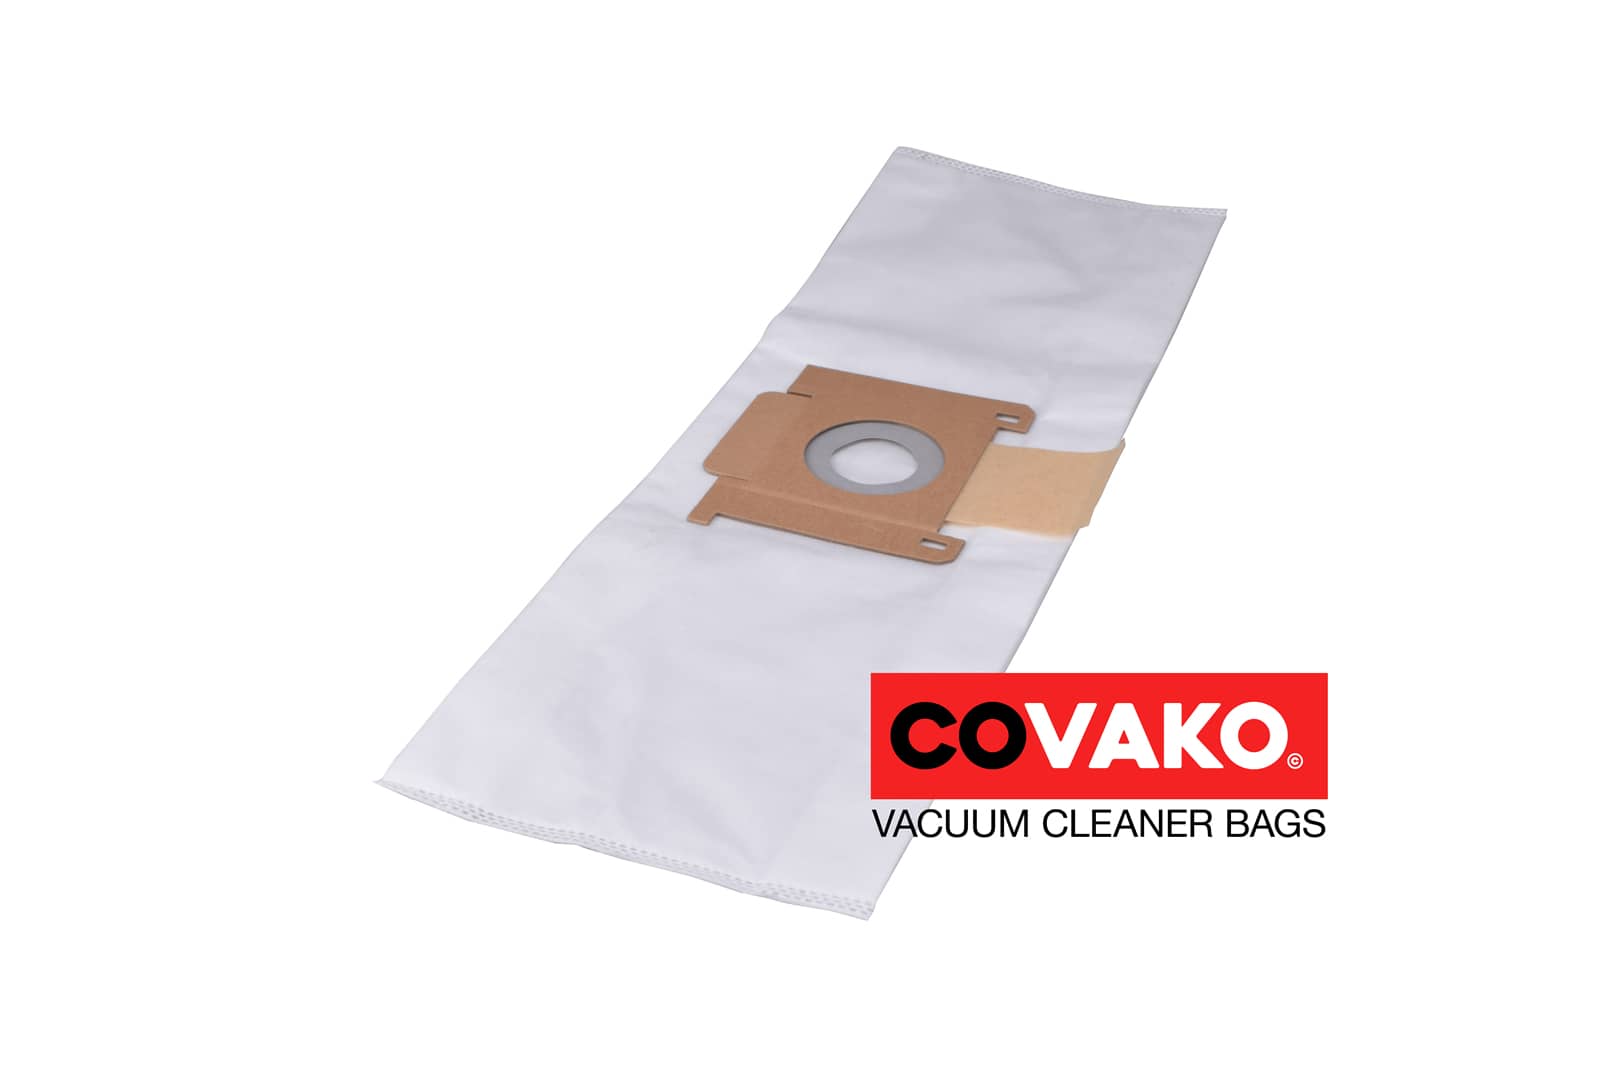 Kenbo tito 6 / Synthesis - Kenbo vacuum cleaner bags